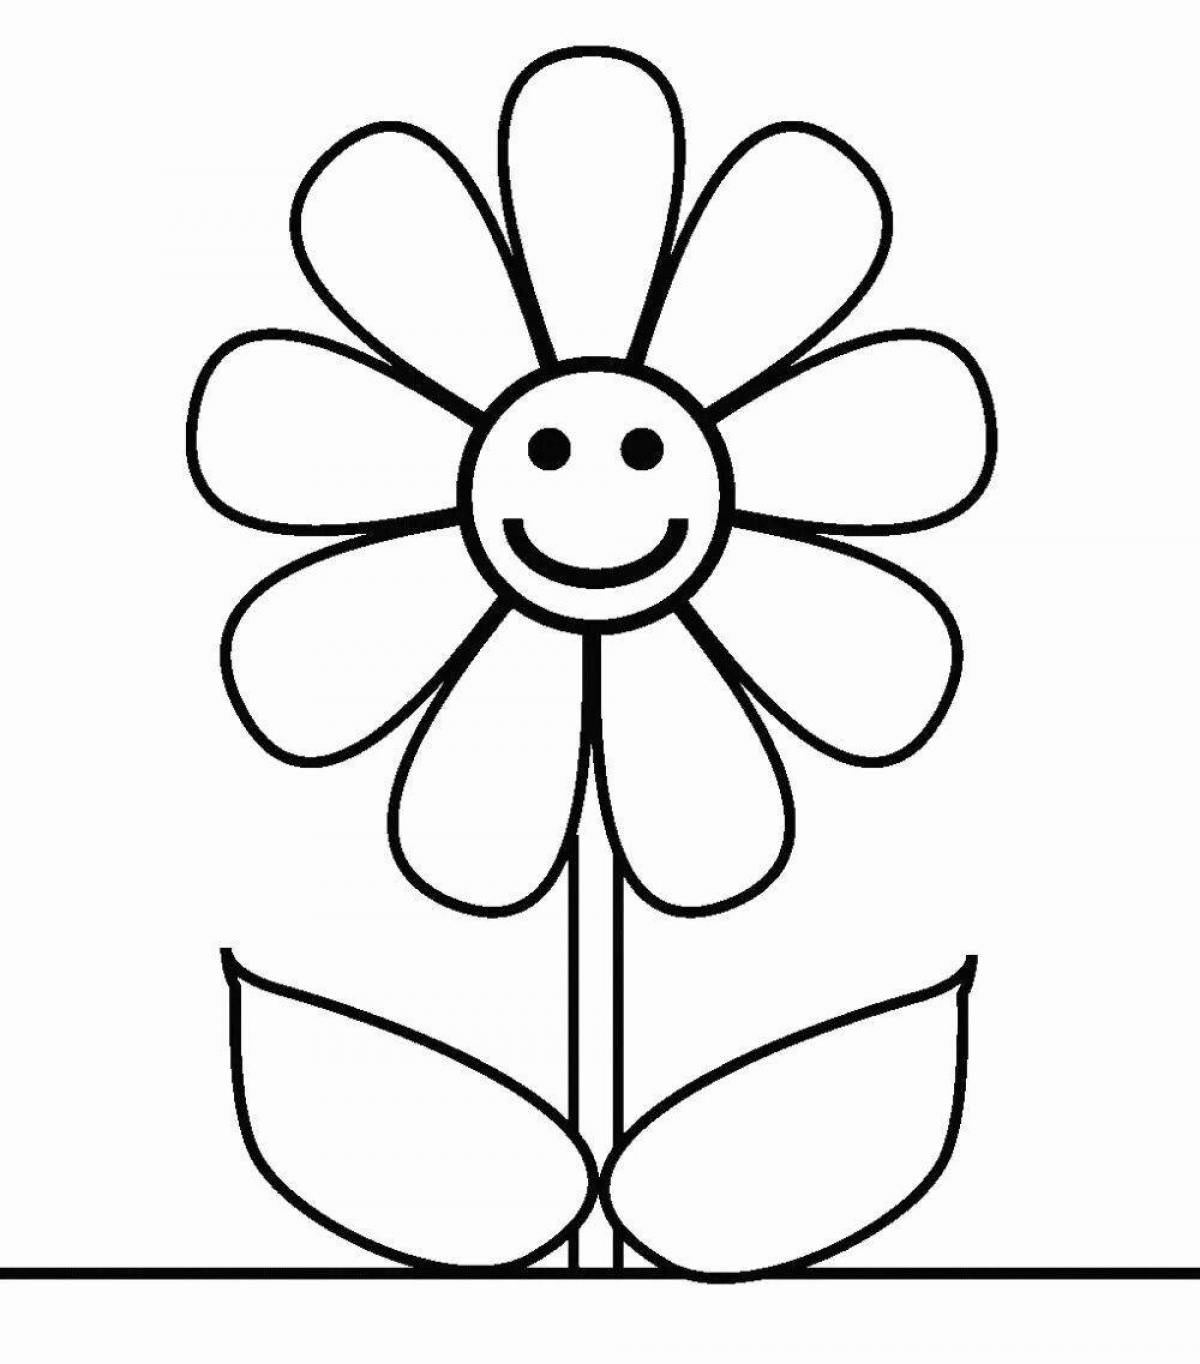 Amazing flower coloring book for toddlers 2 3 years old